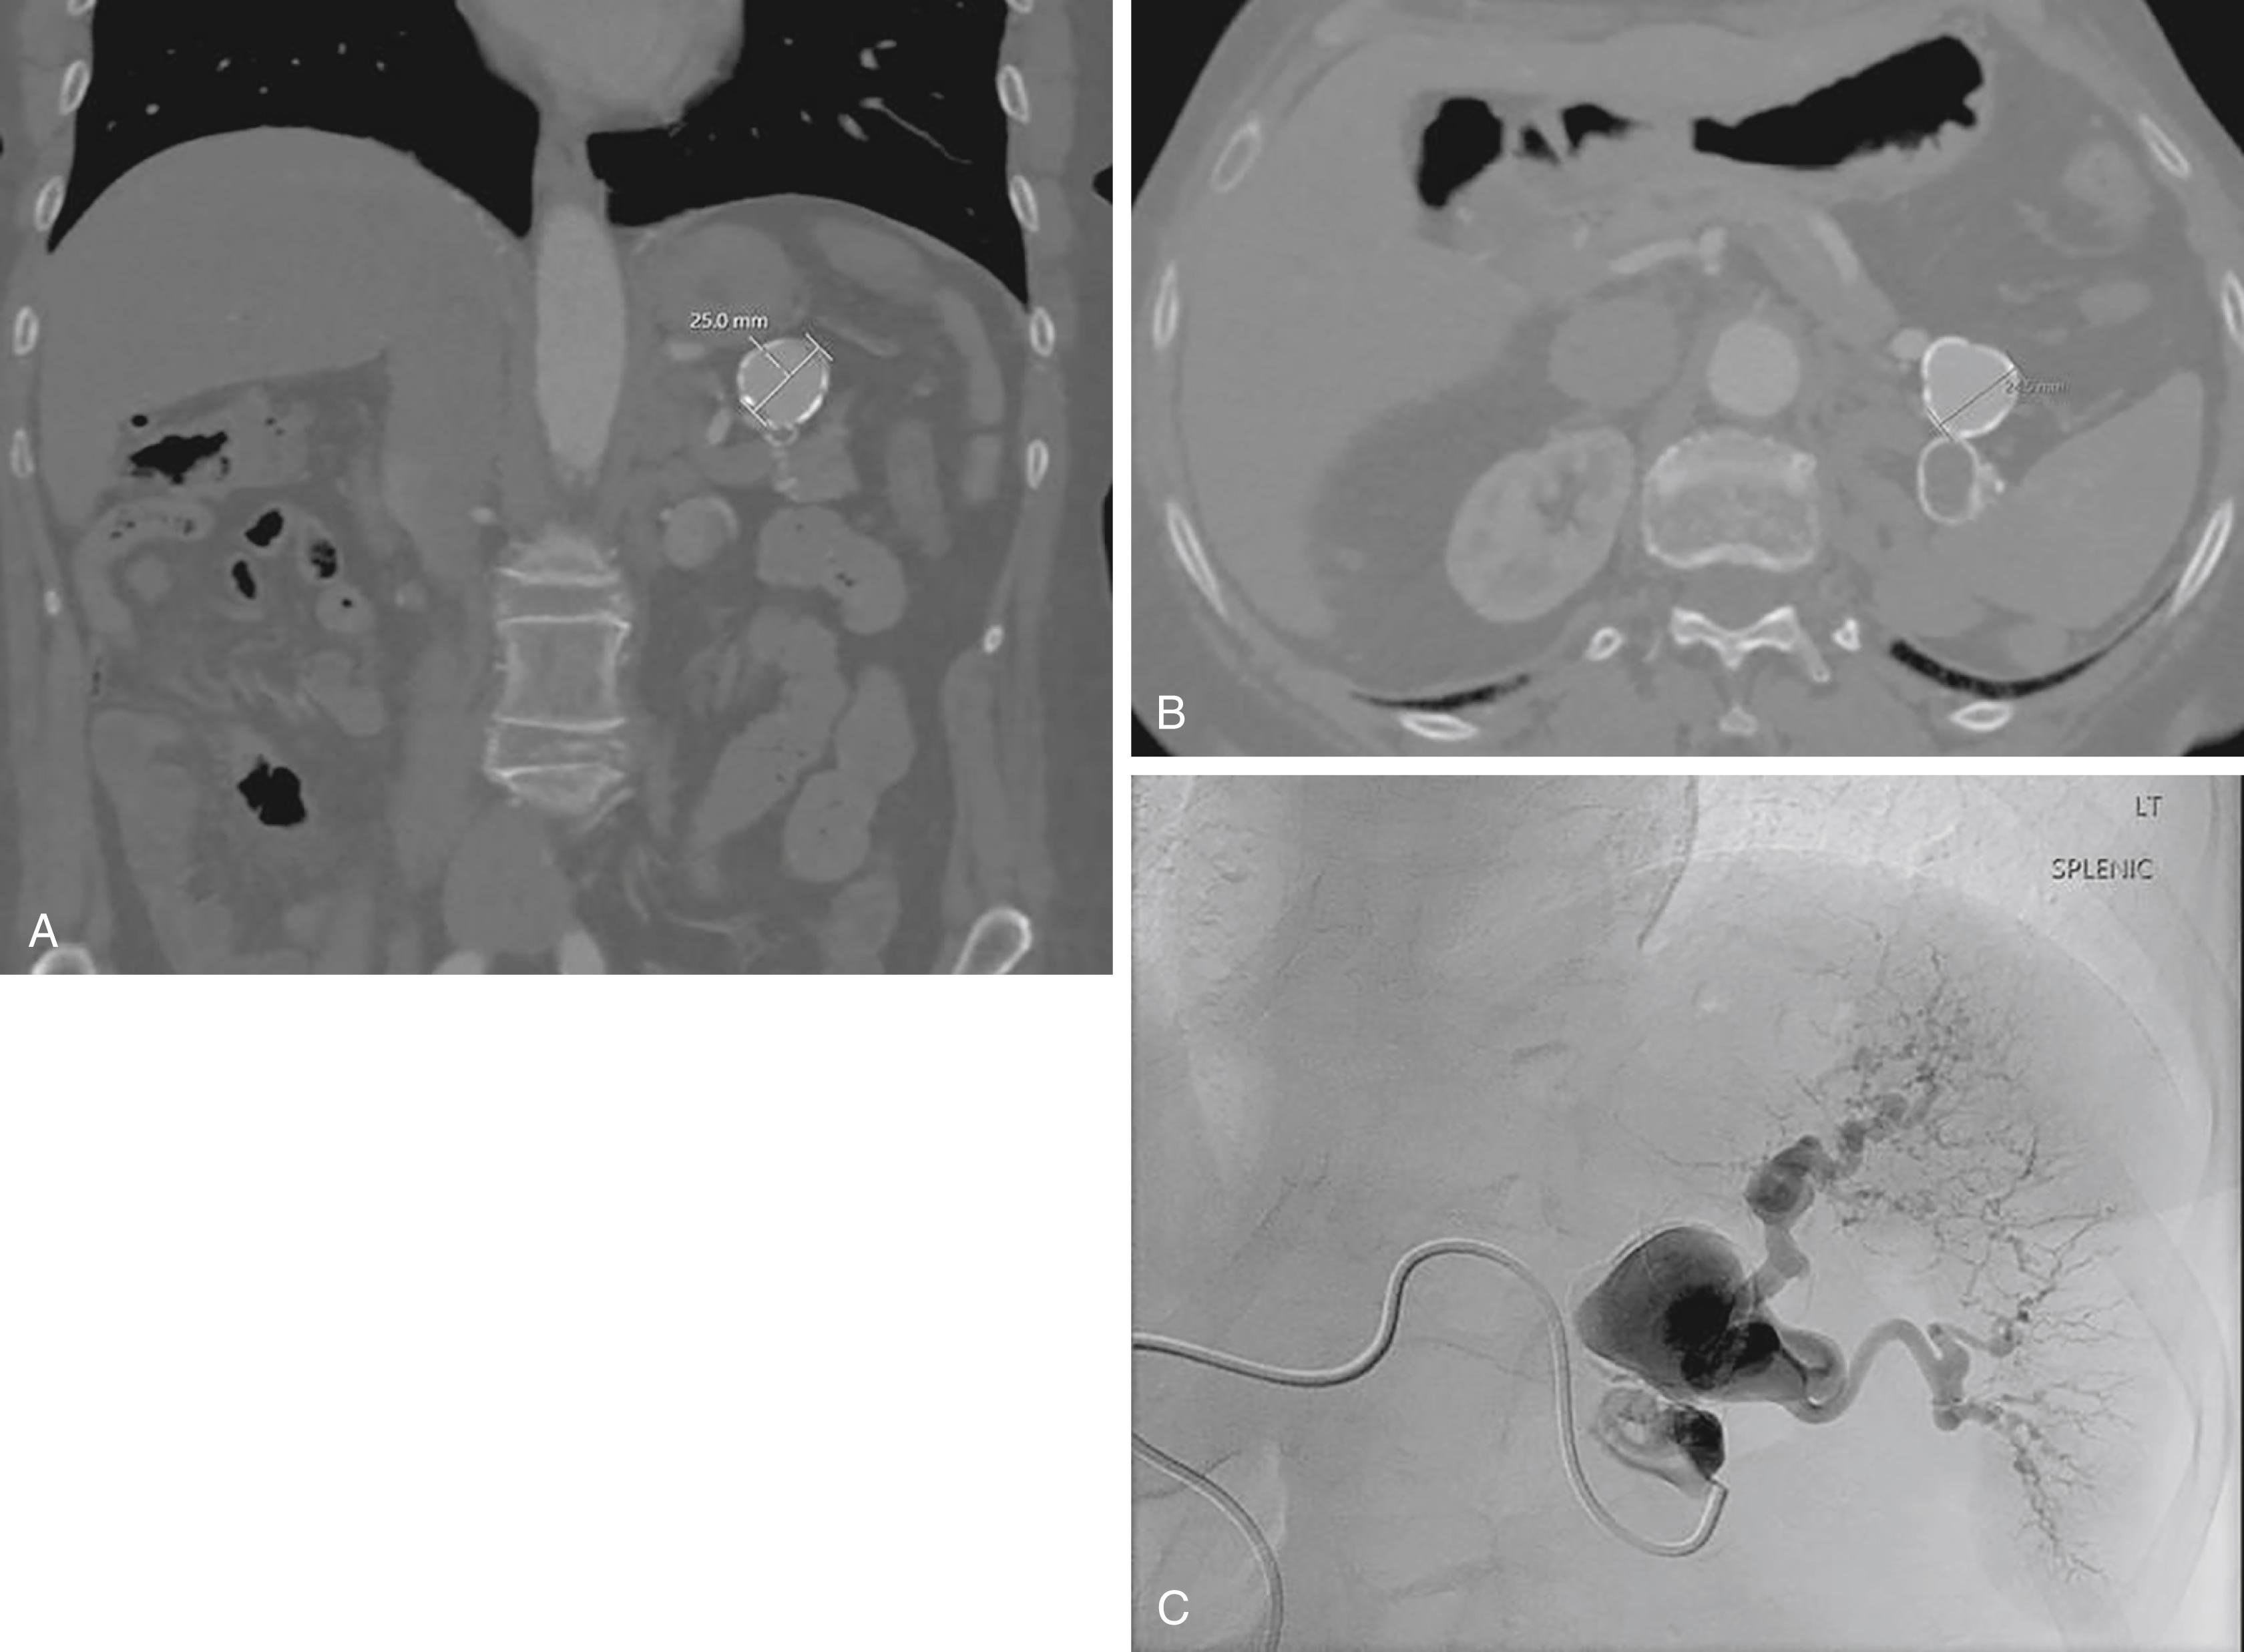 Figure 87.1, A 2.5-cm multilobed splenic artery aneurysm is visualized by CT ( A,B ) and angiogram ( C ). A calcified shell covers the aneurysm sac, with flow maintained to the end organ.